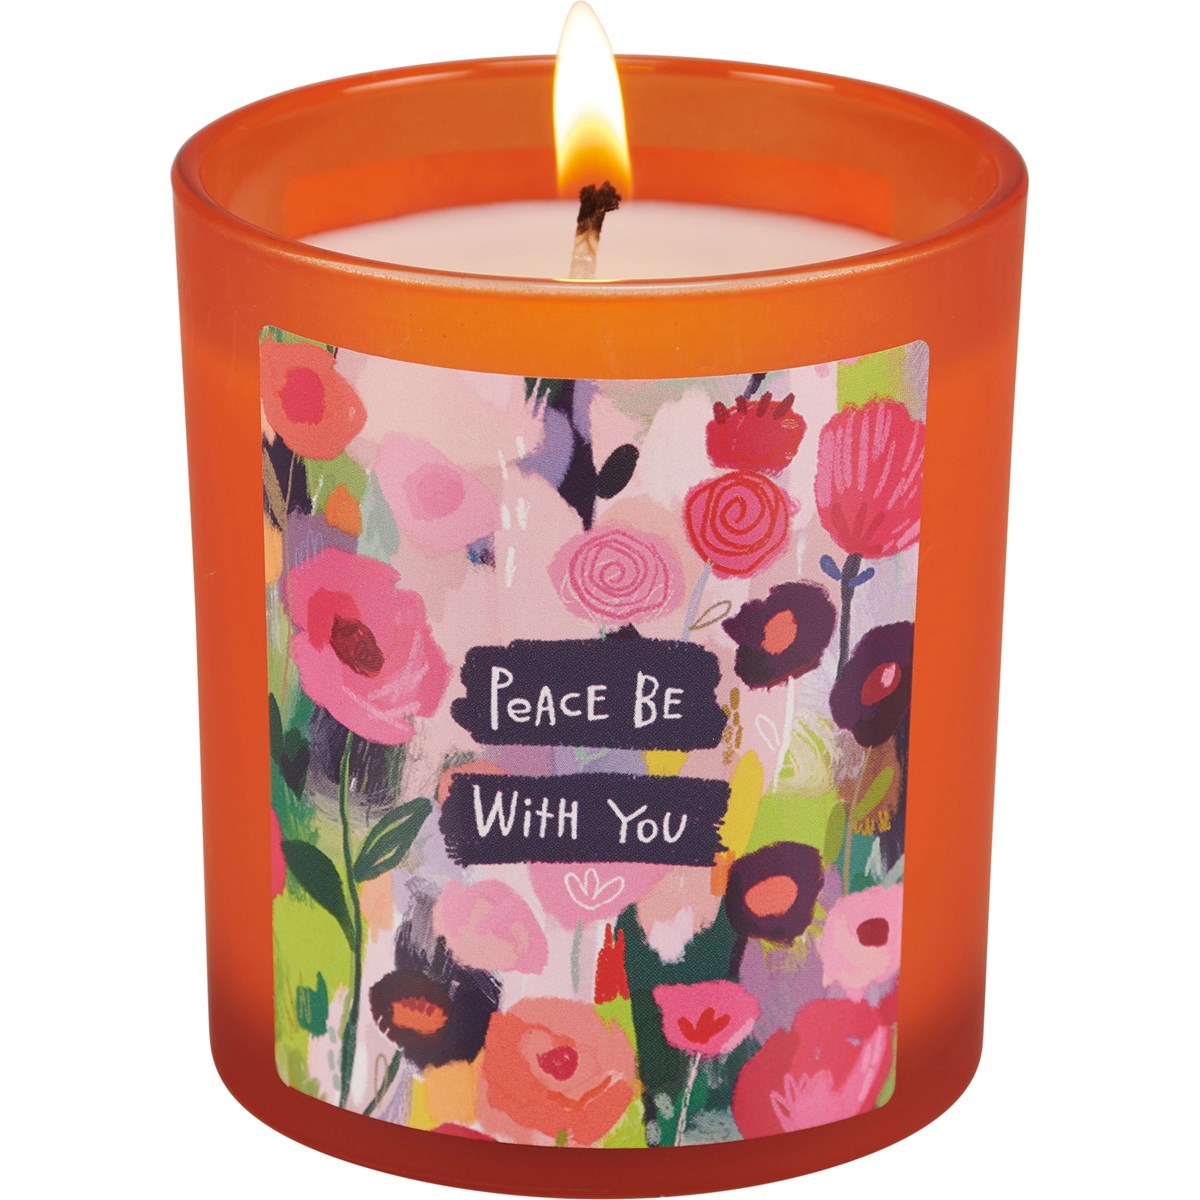 Peace Be With You Jar Candle - Soy Wax, Glass, Cotton